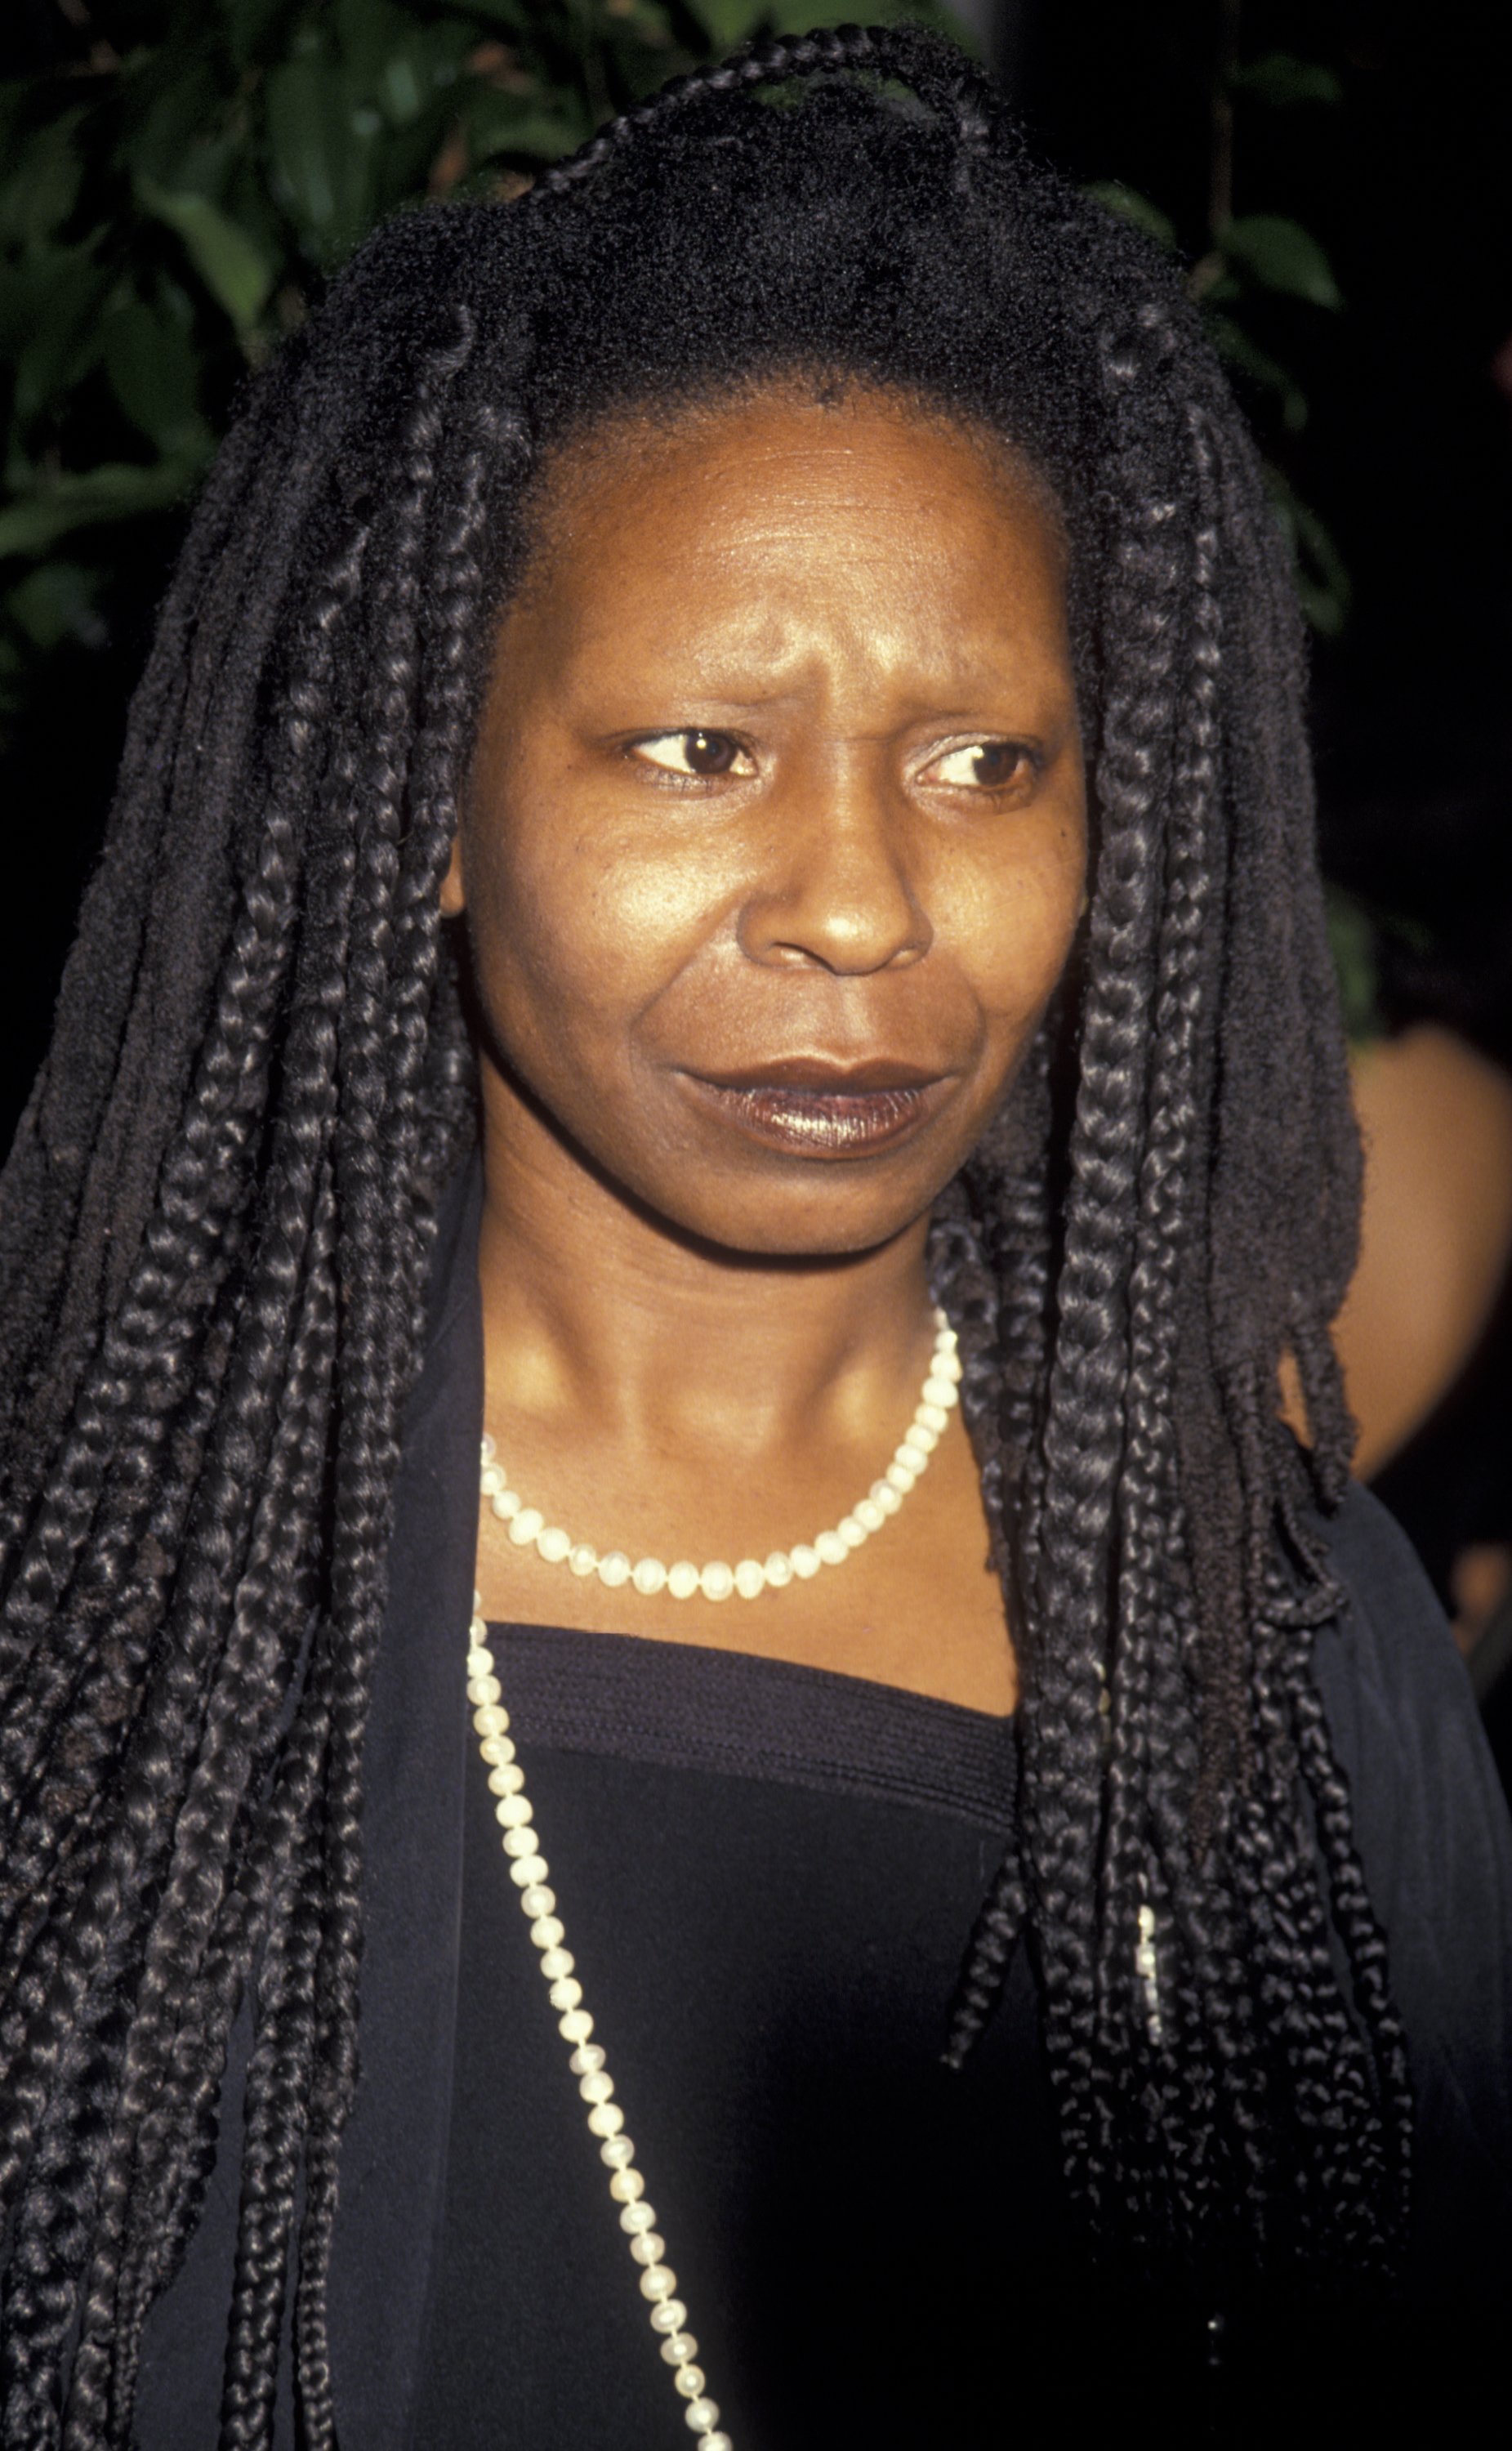 Actress Whoopi Goldberg attends 12th Annual ACE Awards on January 13, 1991 at the Wiltern Theater in Los Angeles, California. | Source: Getty Images